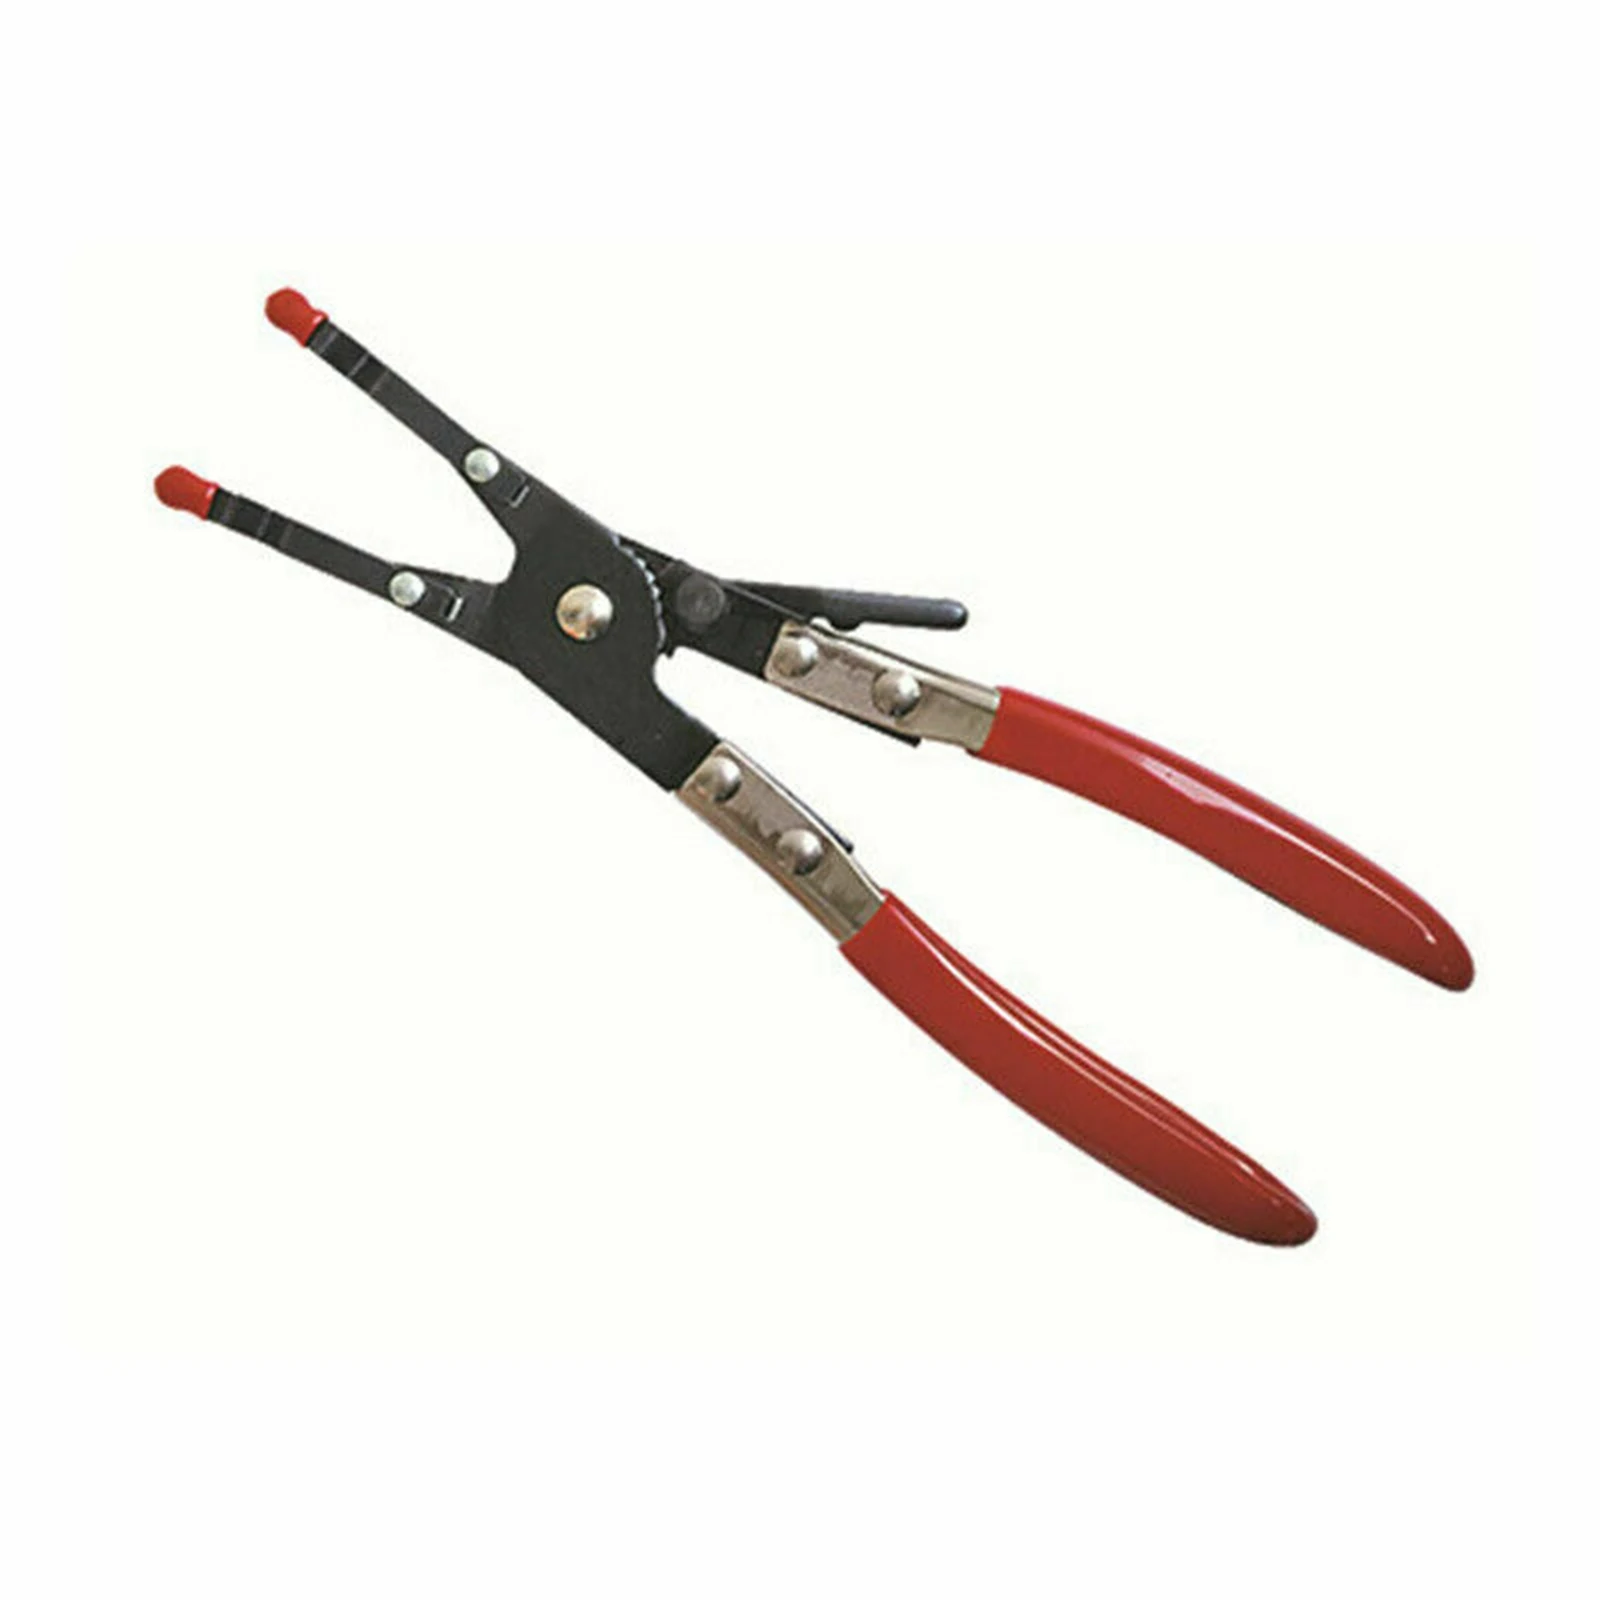 Universal Car Vehicle Soldering Aid Plier Hold 2 Wires Whilst Innovative Tool We - £178.99 GBP